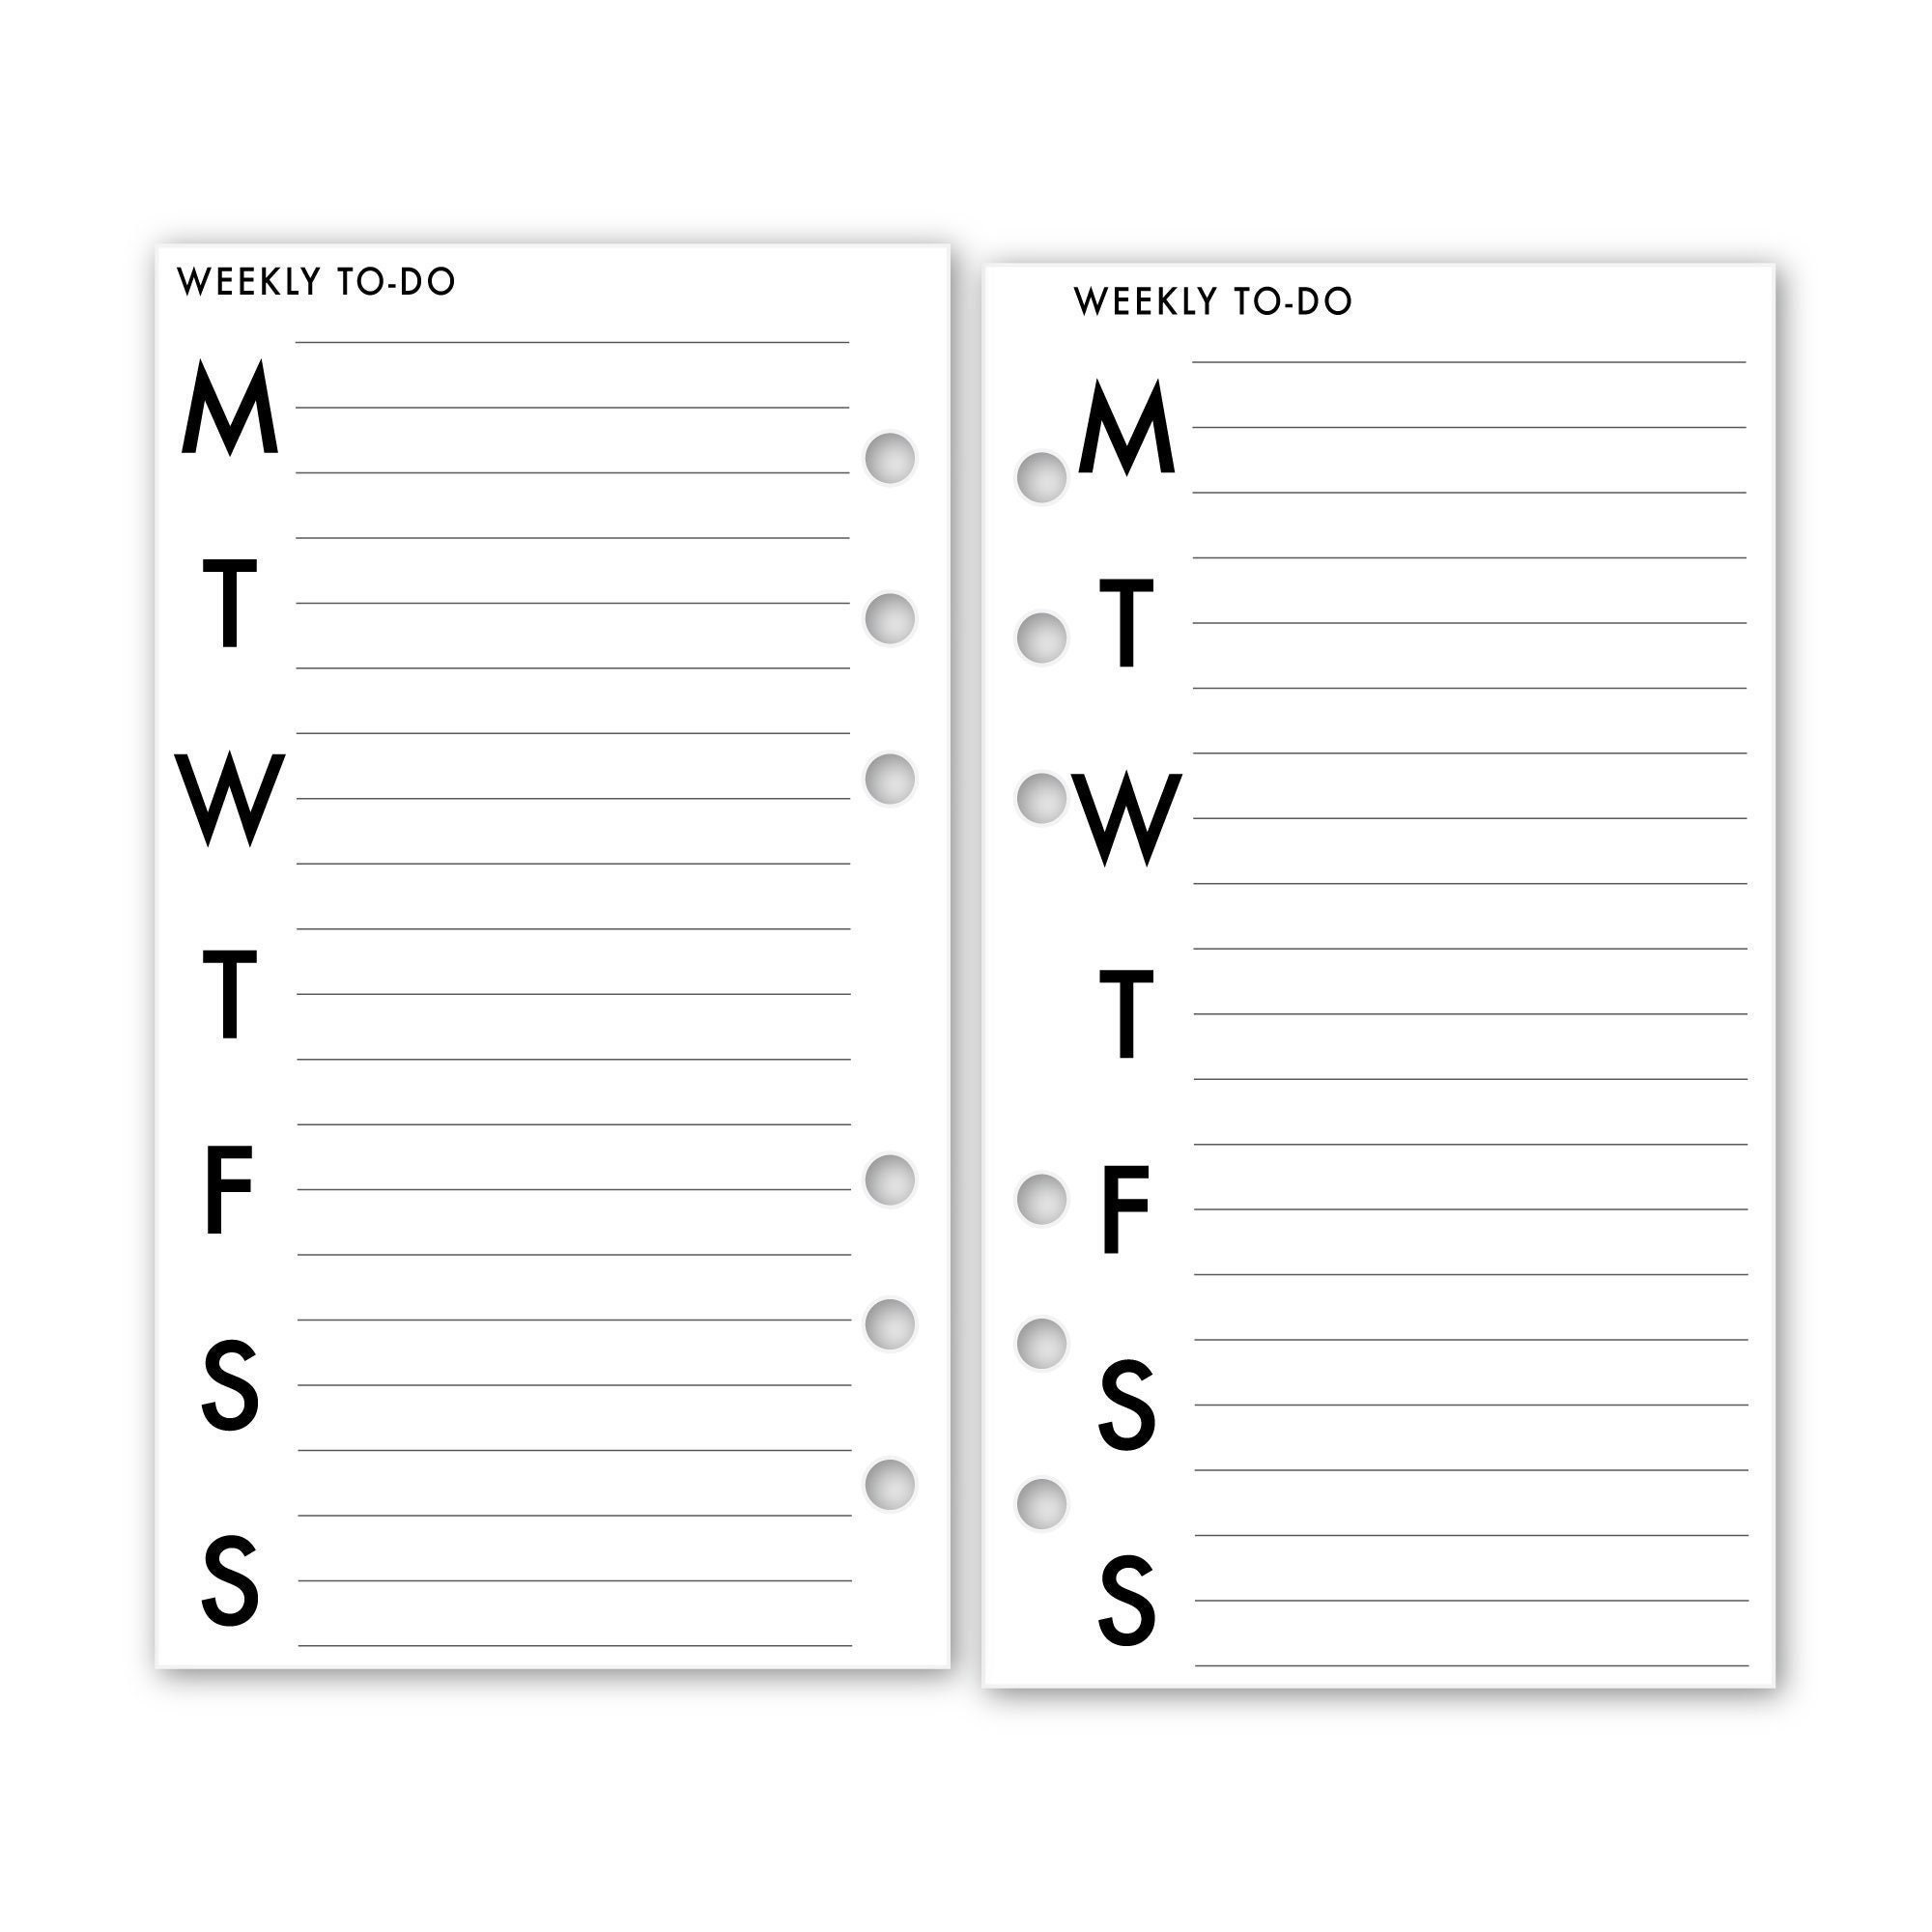  Personal Notes Planner Insert Refill, 3.74 x 6.73 inches,  Pre-Punched for 6-Rings to Fit Filofax, LV MM, Kikki K and Other Binders,  30 Sheets Per Pack : Handmade Products